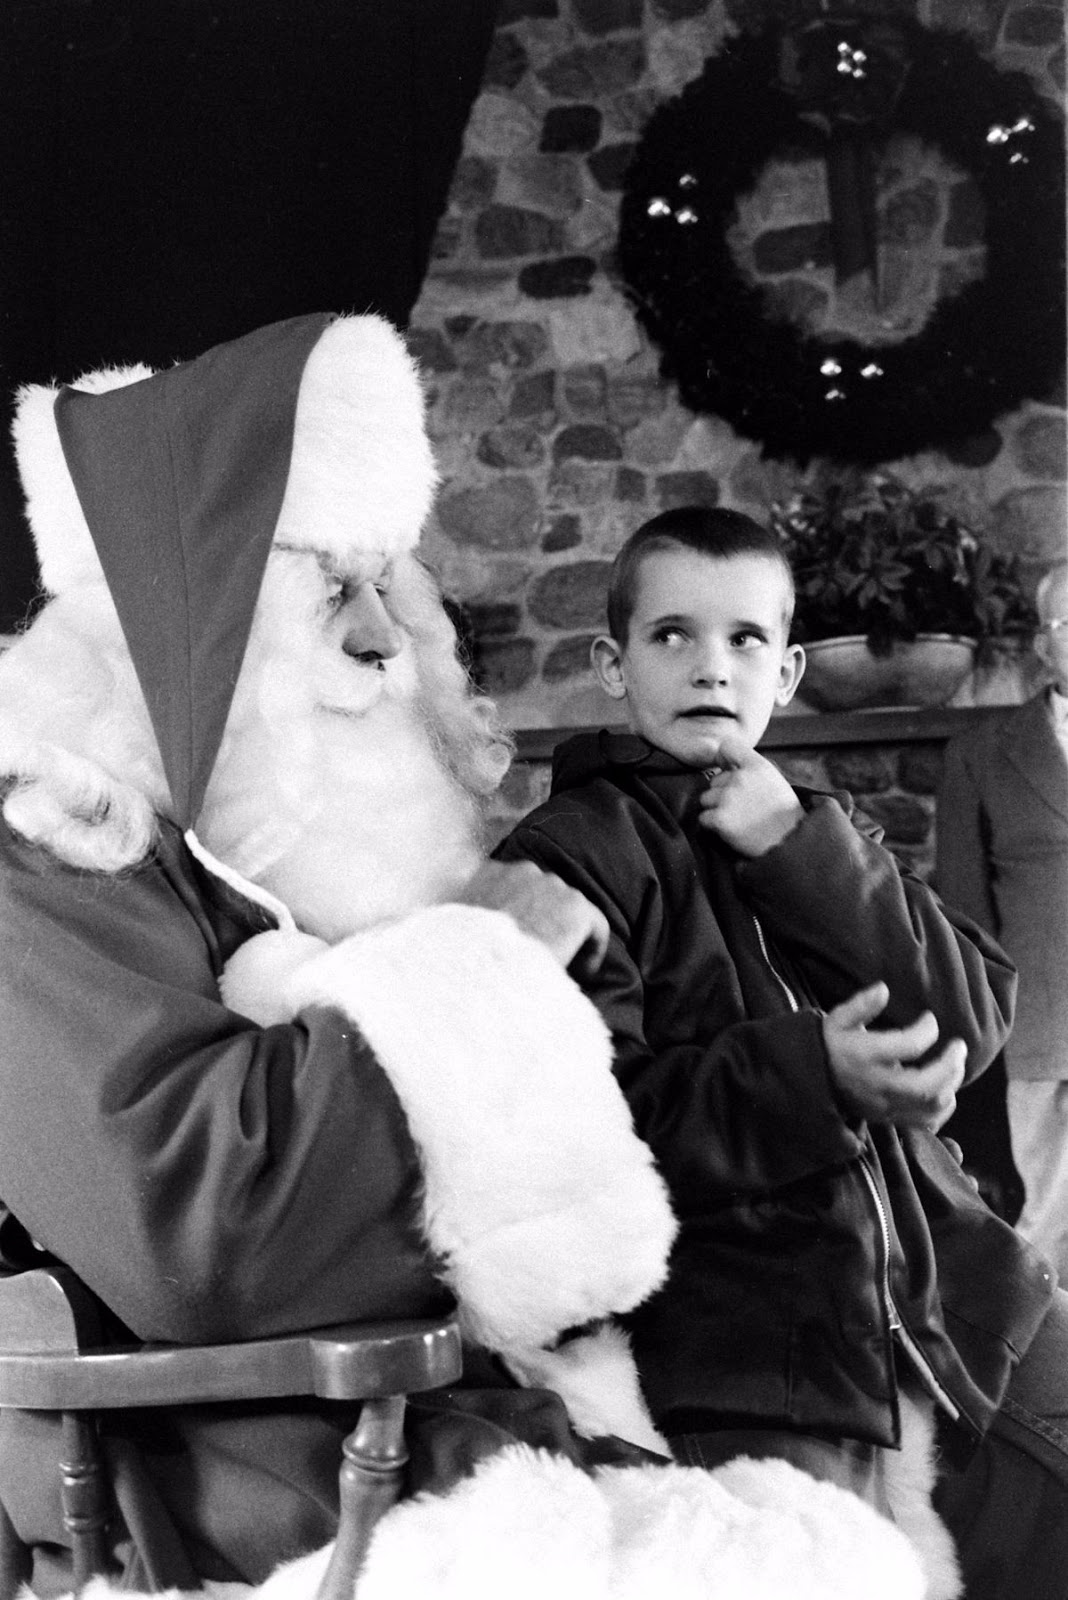 These Vintage Photographs from a Santa Claus School in 1961 Reveal Some ...